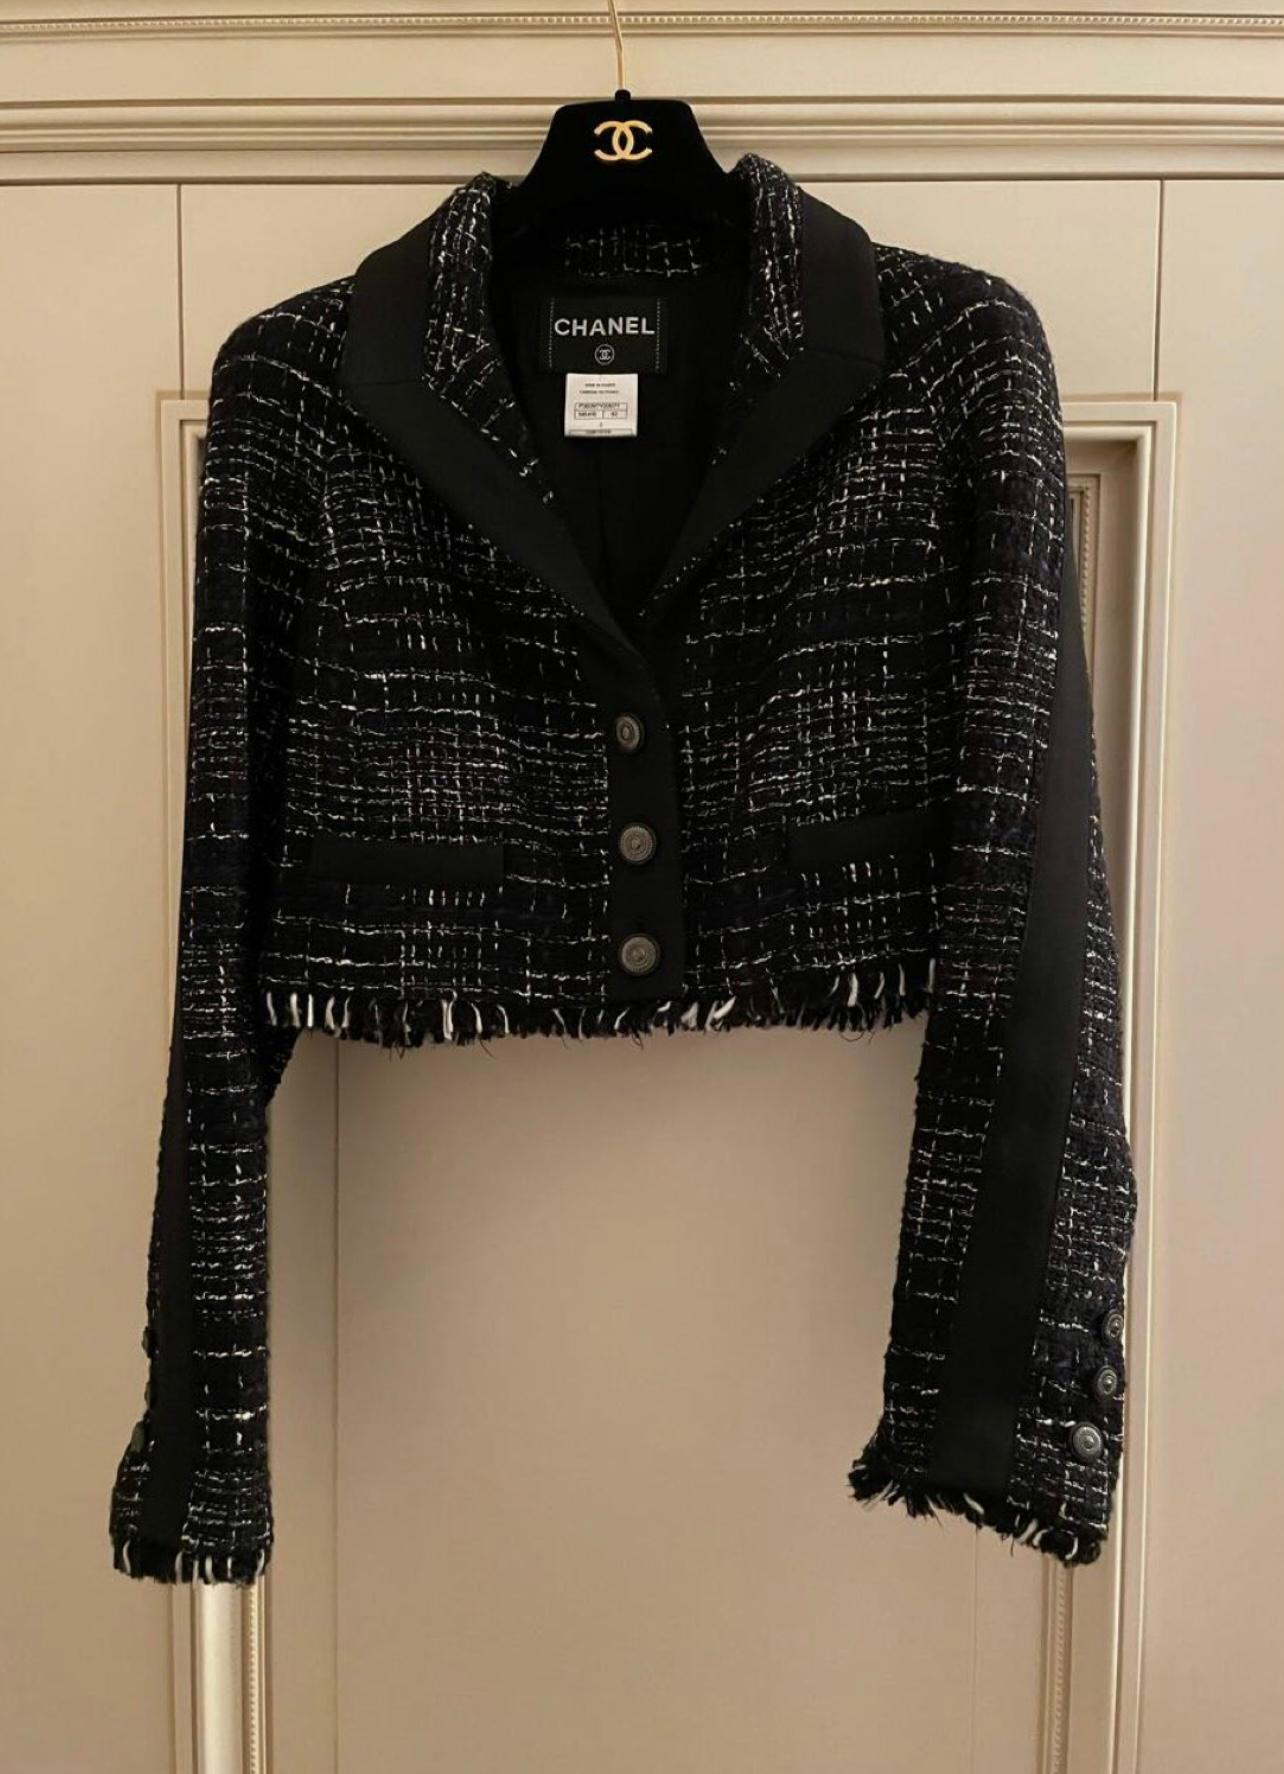 New Chanel timeless black tweed jacket with CC logo buttons.
Full silk lining, size mark 42 FR. Never worn.